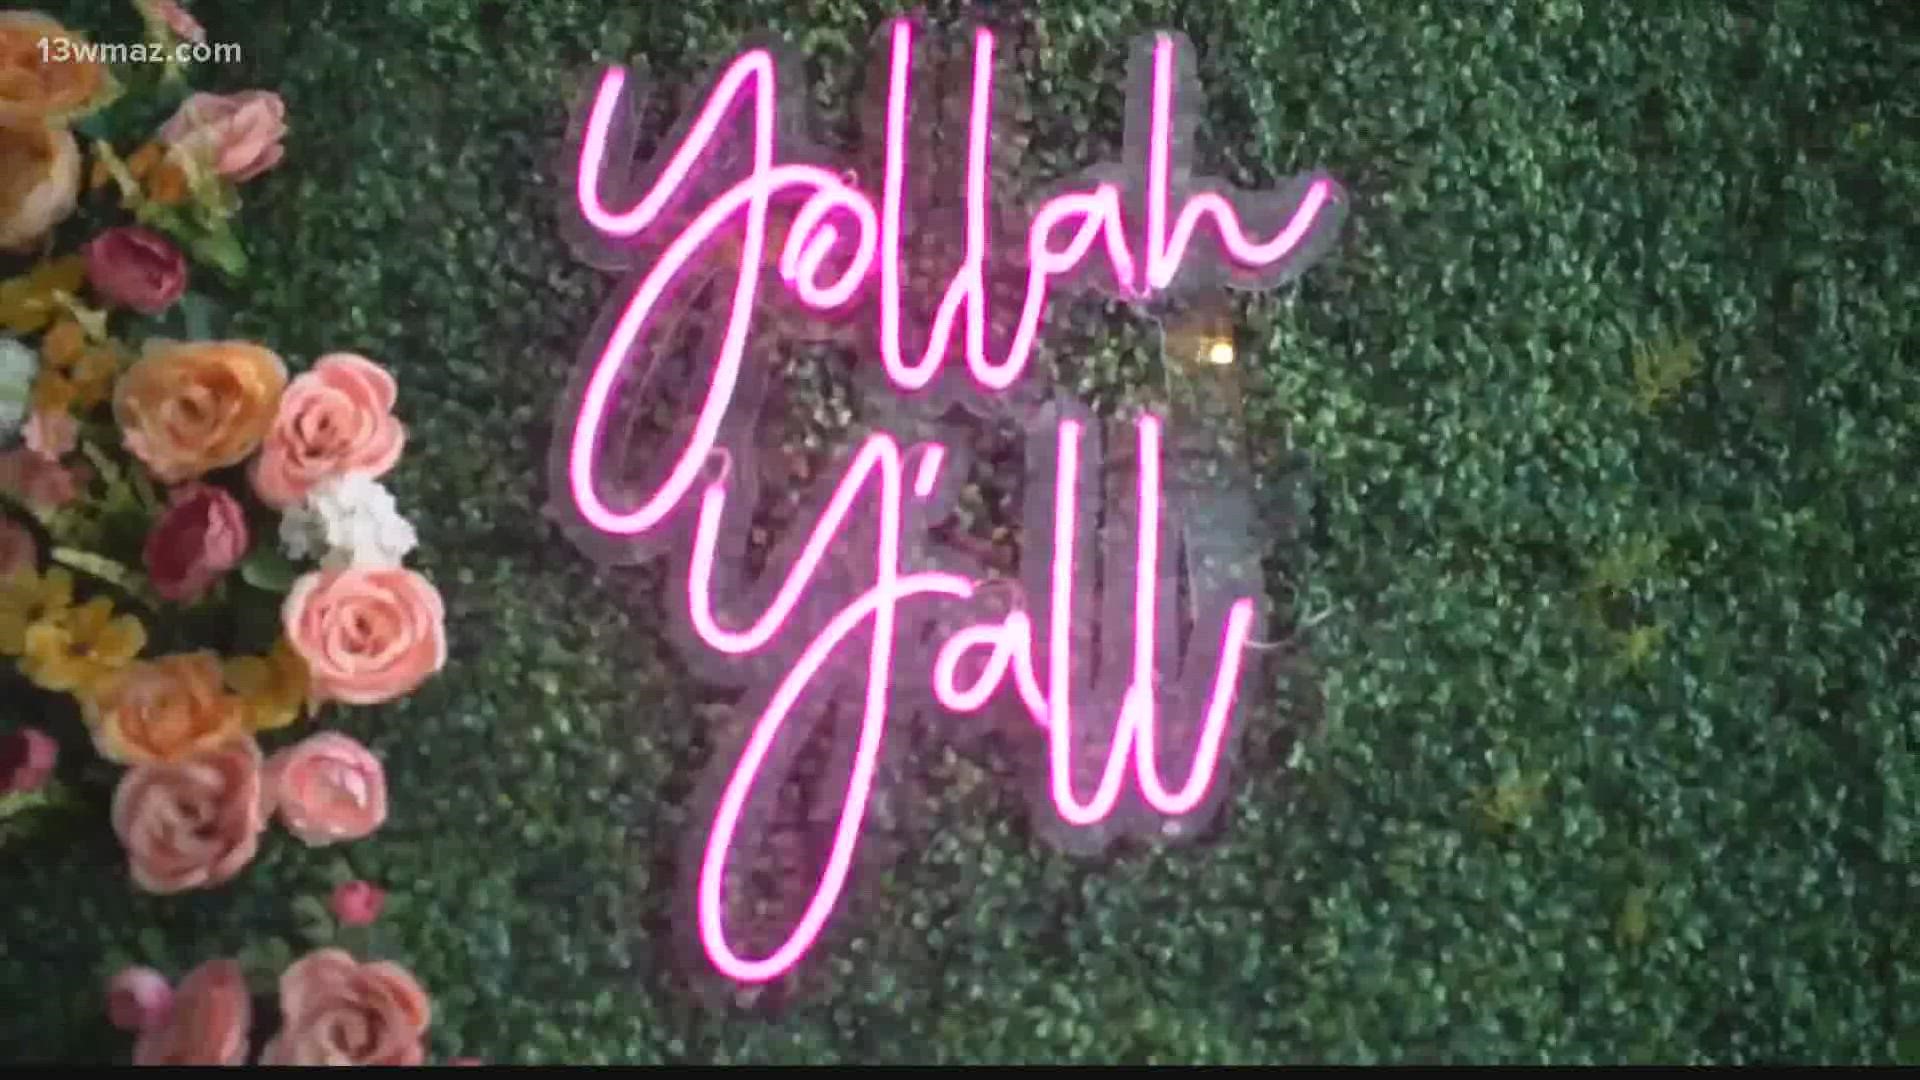 Yollah on College Street will soon be serving food and drinks on their patio in a refurbished travel trailer